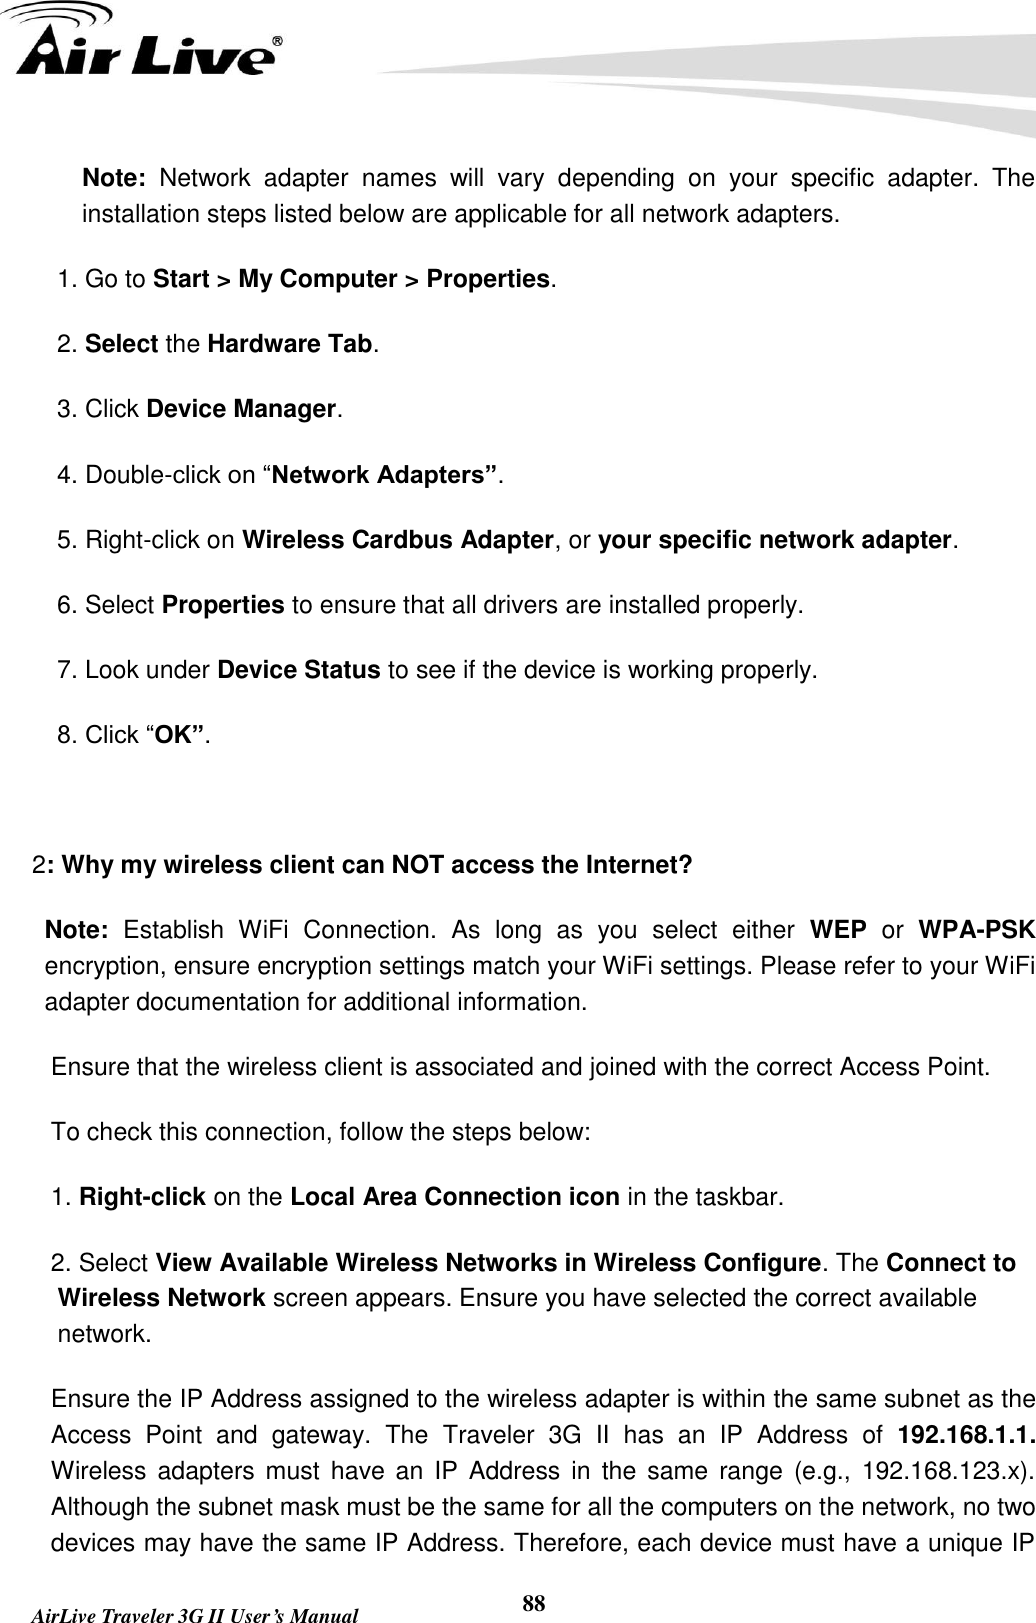        AirLive Traveler 3G II User’s Manual 88 Note:  Network  adapter  names  will  vary  depending  on  your  specific  adapter.  The installation steps listed below are applicable for all network adapters. 1. Go to Start &gt; My Computer &gt; Properties. 2. Select the Hardware Tab. 3. Click Device Manager. 4. Double-click on “Network Adapters”. 5. Right-click on Wireless Cardbus Adapter, or your specific network adapter. 6. Select Properties to ensure that all drivers are installed properly. 7. Look under Device Status to see if the device is working properly. 8. Click “OK”.  2: Why my wireless client can NOT access the Internet? Note:  Establish  WiFi  Connection.  As  long  as  you  select  either  WEP  or  WPA-PSK encryption, ensure encryption settings match your WiFi settings. Please refer to your WiFi adapter documentation for additional information.                       Ensure that the wireless client is associated and joined with the correct Access Point. To check this connection, follow the steps below: 1. Right-click on the Local Area Connection icon in the taskbar. 2. Select View Available Wireless Networks in Wireless Configure. The Connect to Wireless Network screen appears. Ensure you have selected the correct available network. Ensure the IP Address assigned to the wireless adapter is within the same subnet as the Access  Point  and  gateway.  The  Traveler  3G  II  has  an  IP  Address  of  192.168.1.1. Wireless  adapters must  have an IP  Address  in  the  same  range  (e.g., 192.168.123.x). Although the subnet mask must be the same for all the computers on the network, no two devices may have the same IP Address. Therefore, each device must have a unique IP 